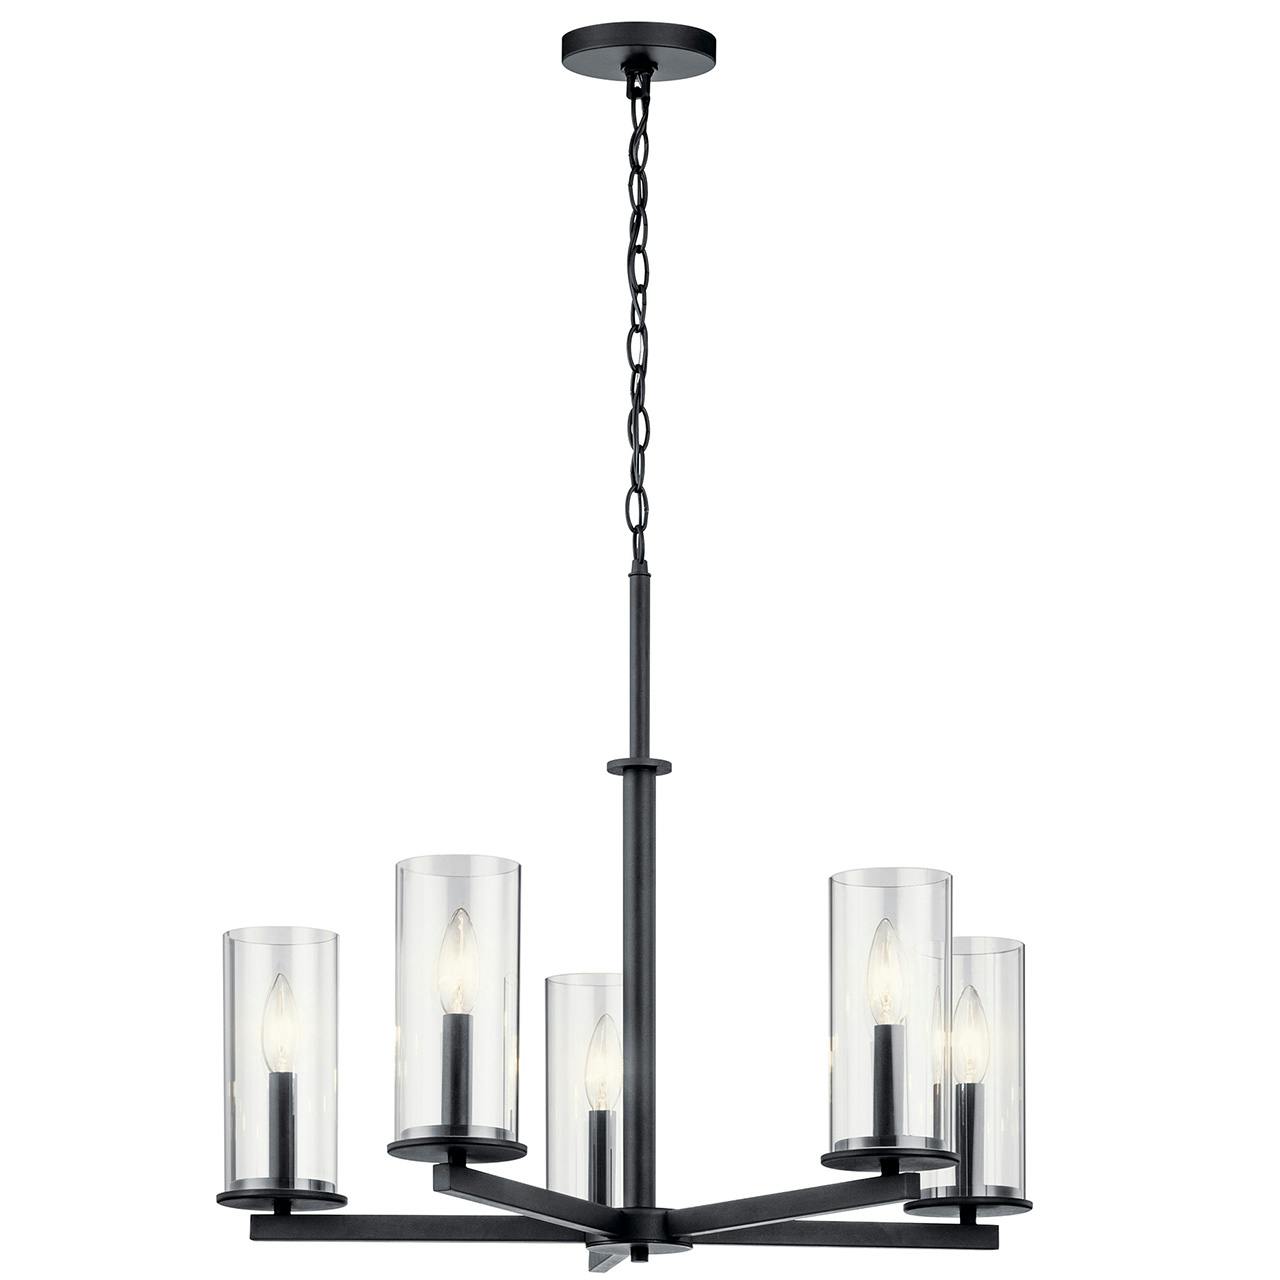 Crosby 5 Light Chandelier Black on a white background